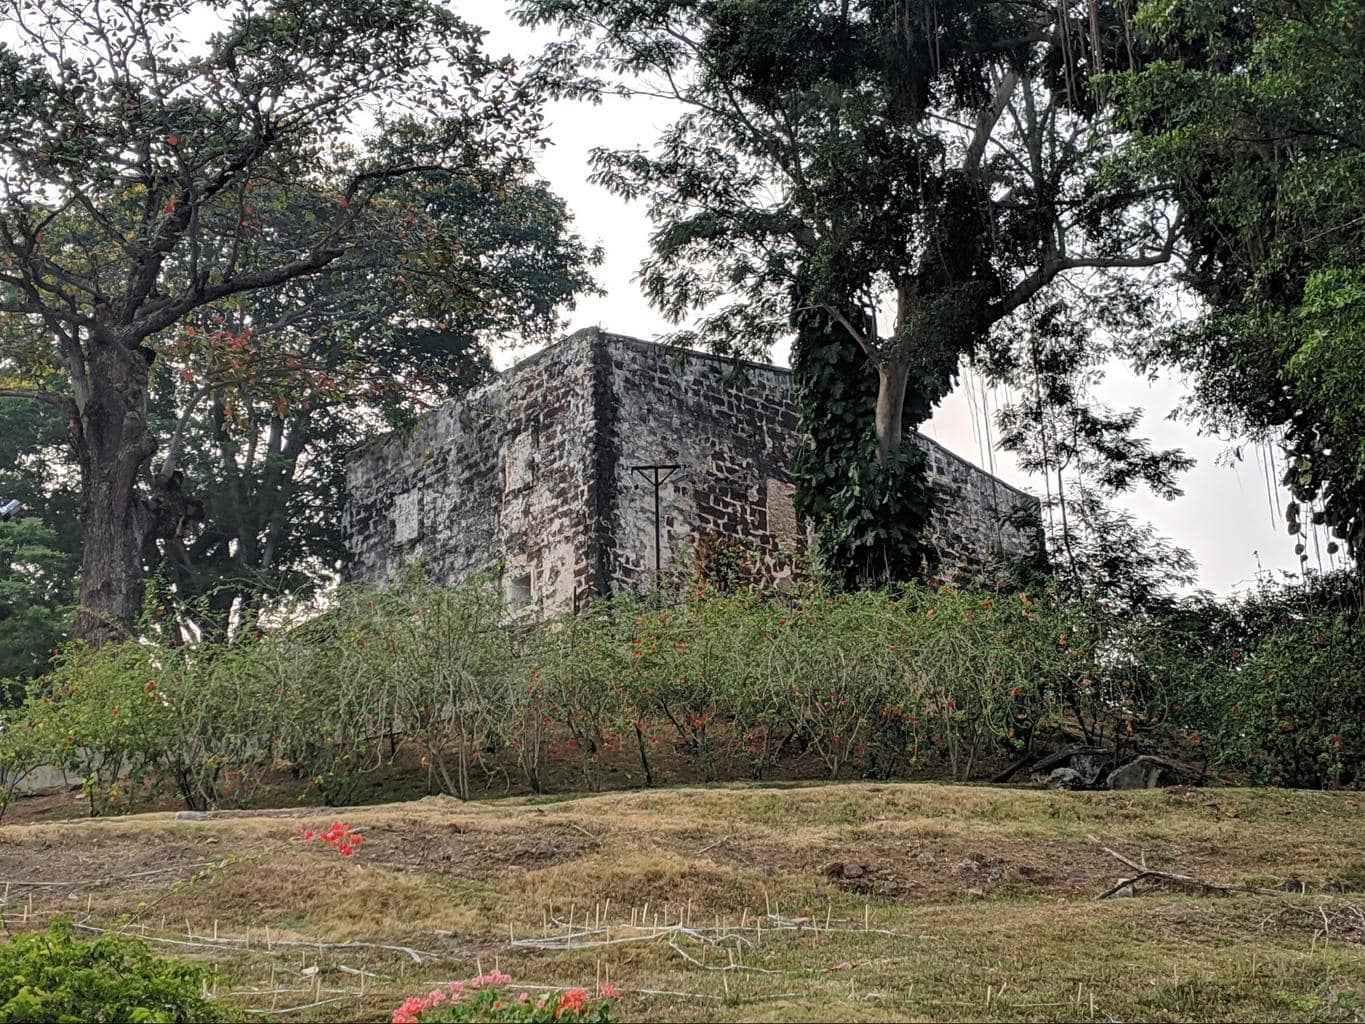 What’s left of St. Paul’s Church in Malacca